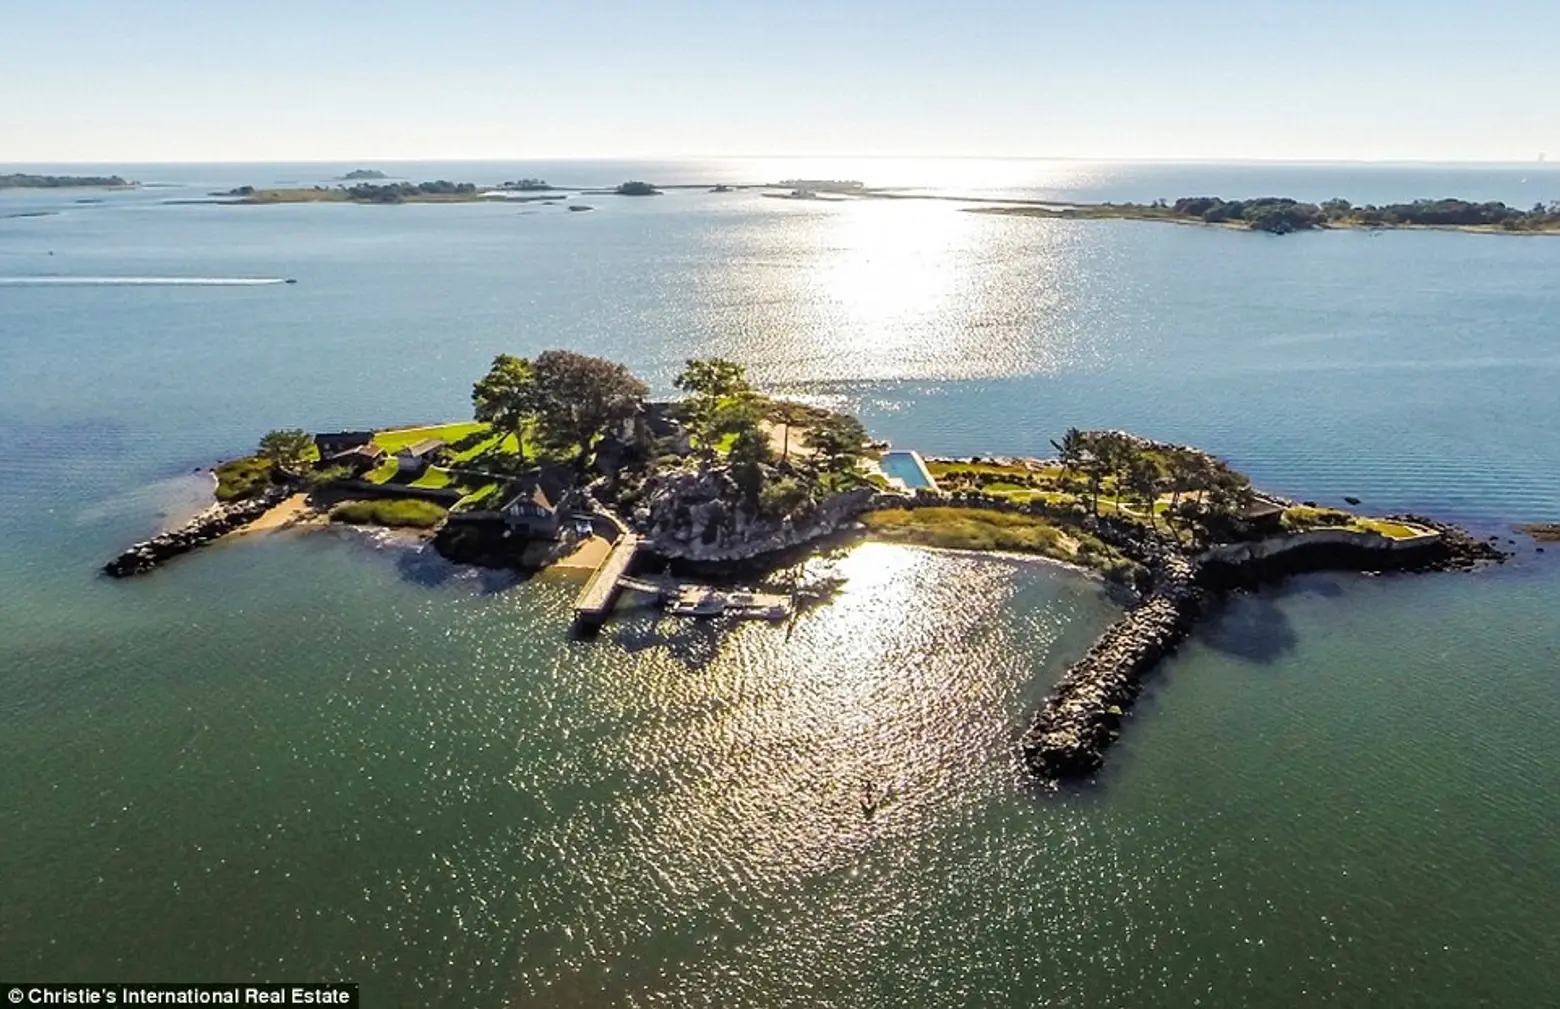 Own a Mansion with Celebrity History on a Private Island Overlooking NYC for $11M